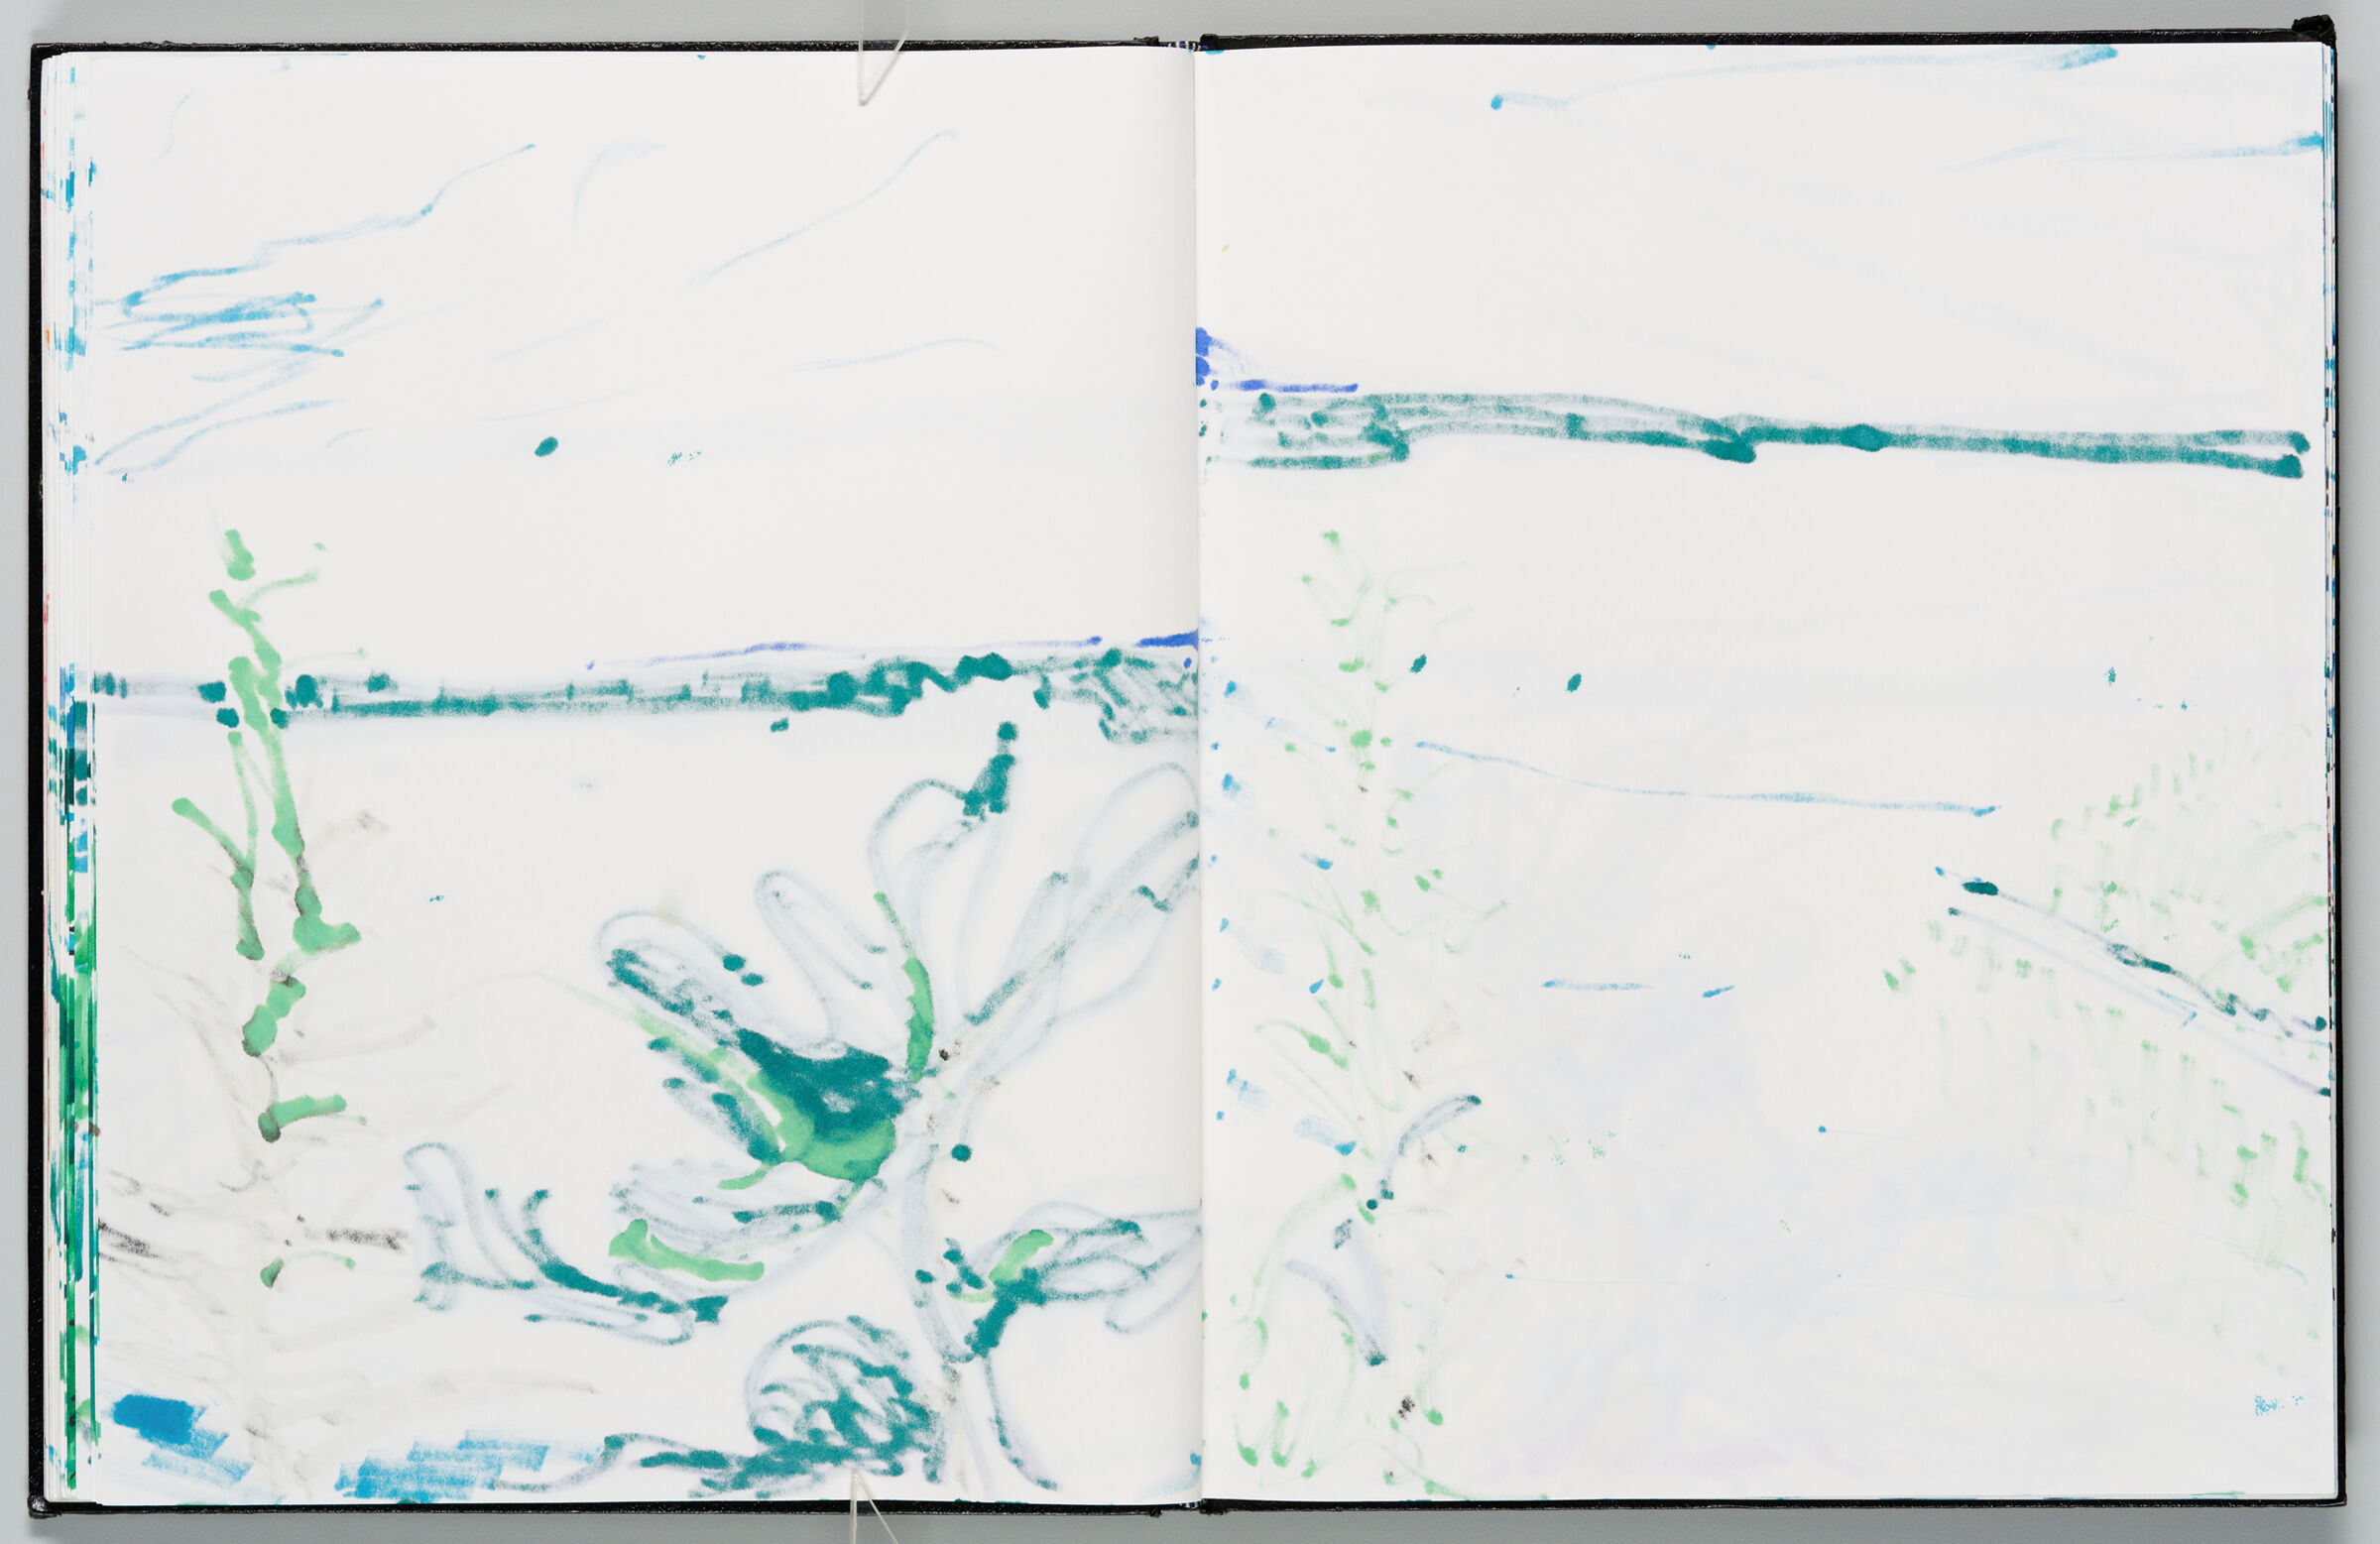 Untitled (Bleed-Through From Previous Page, Left Page); Untitled (Bleed-Through Of Following Page, Right Page)